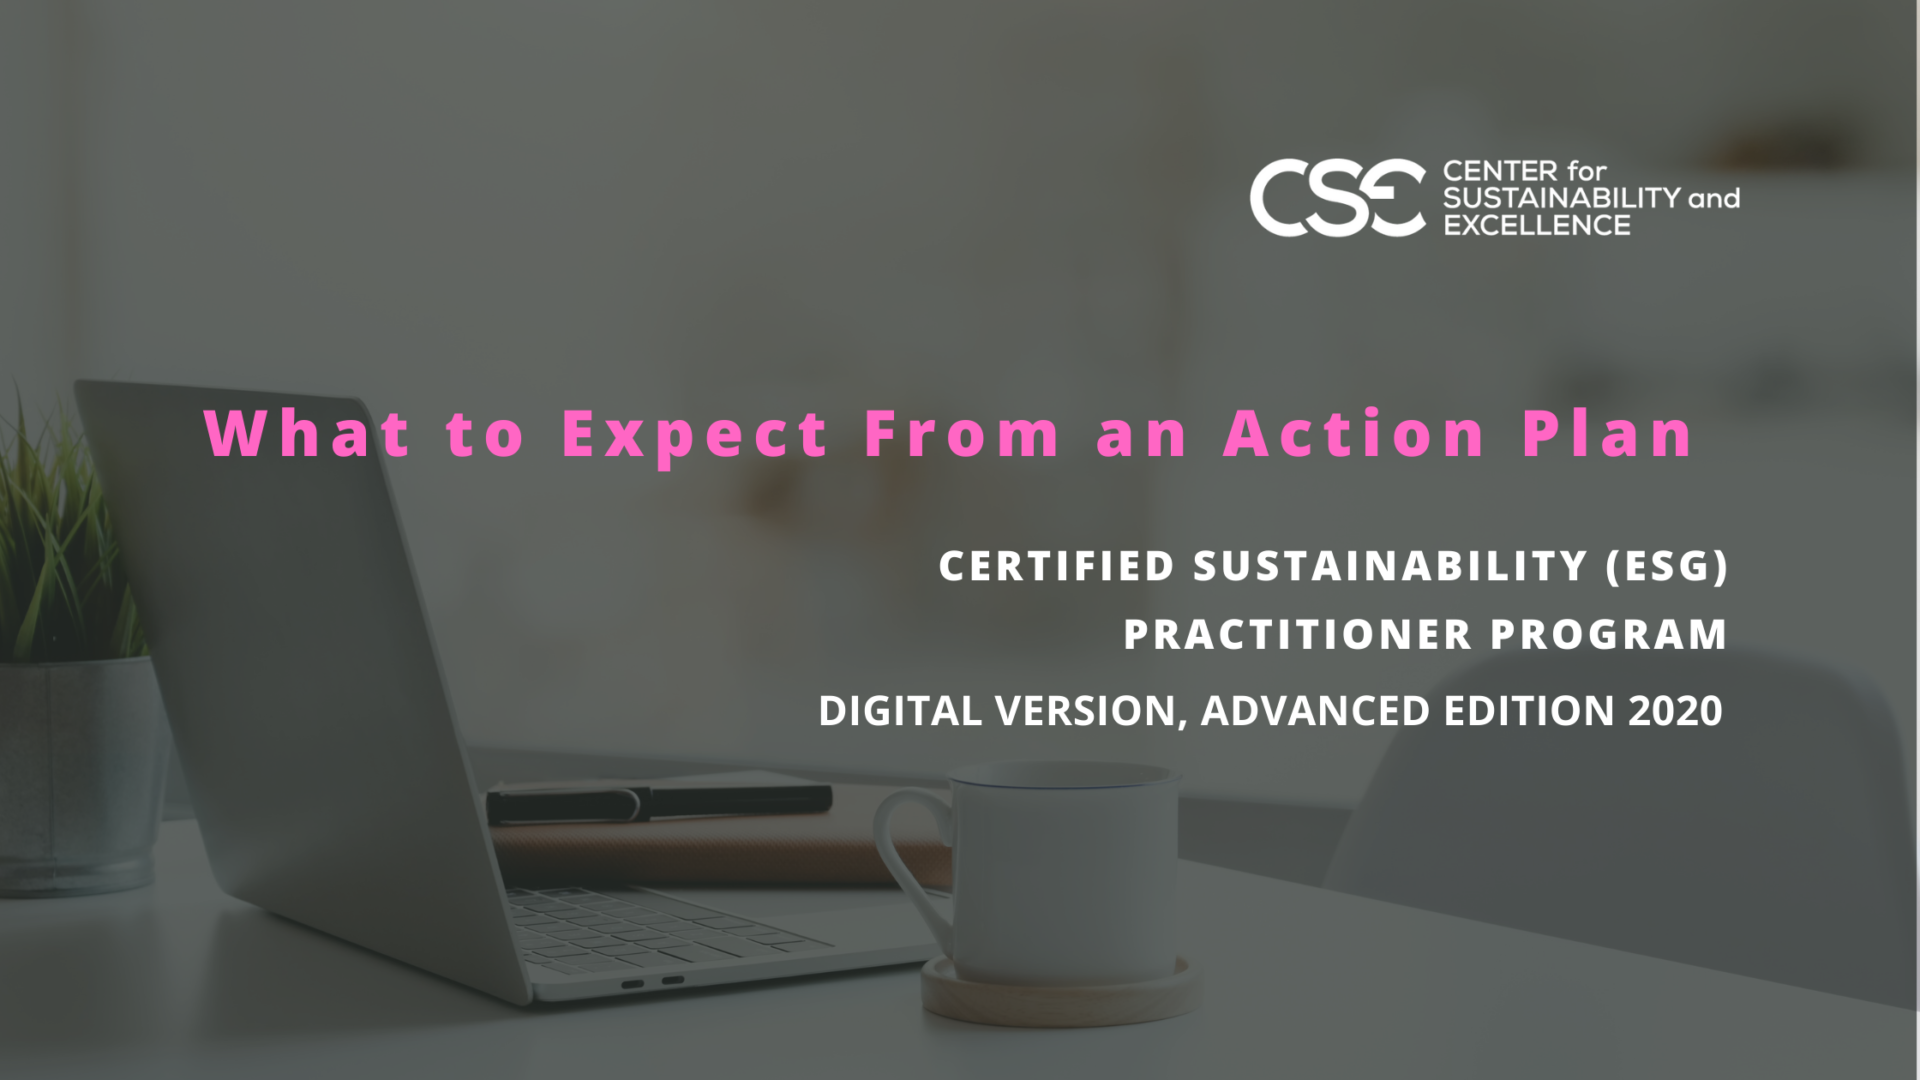 Part 1 in our series What to Expect from a Digital Sustainability Training